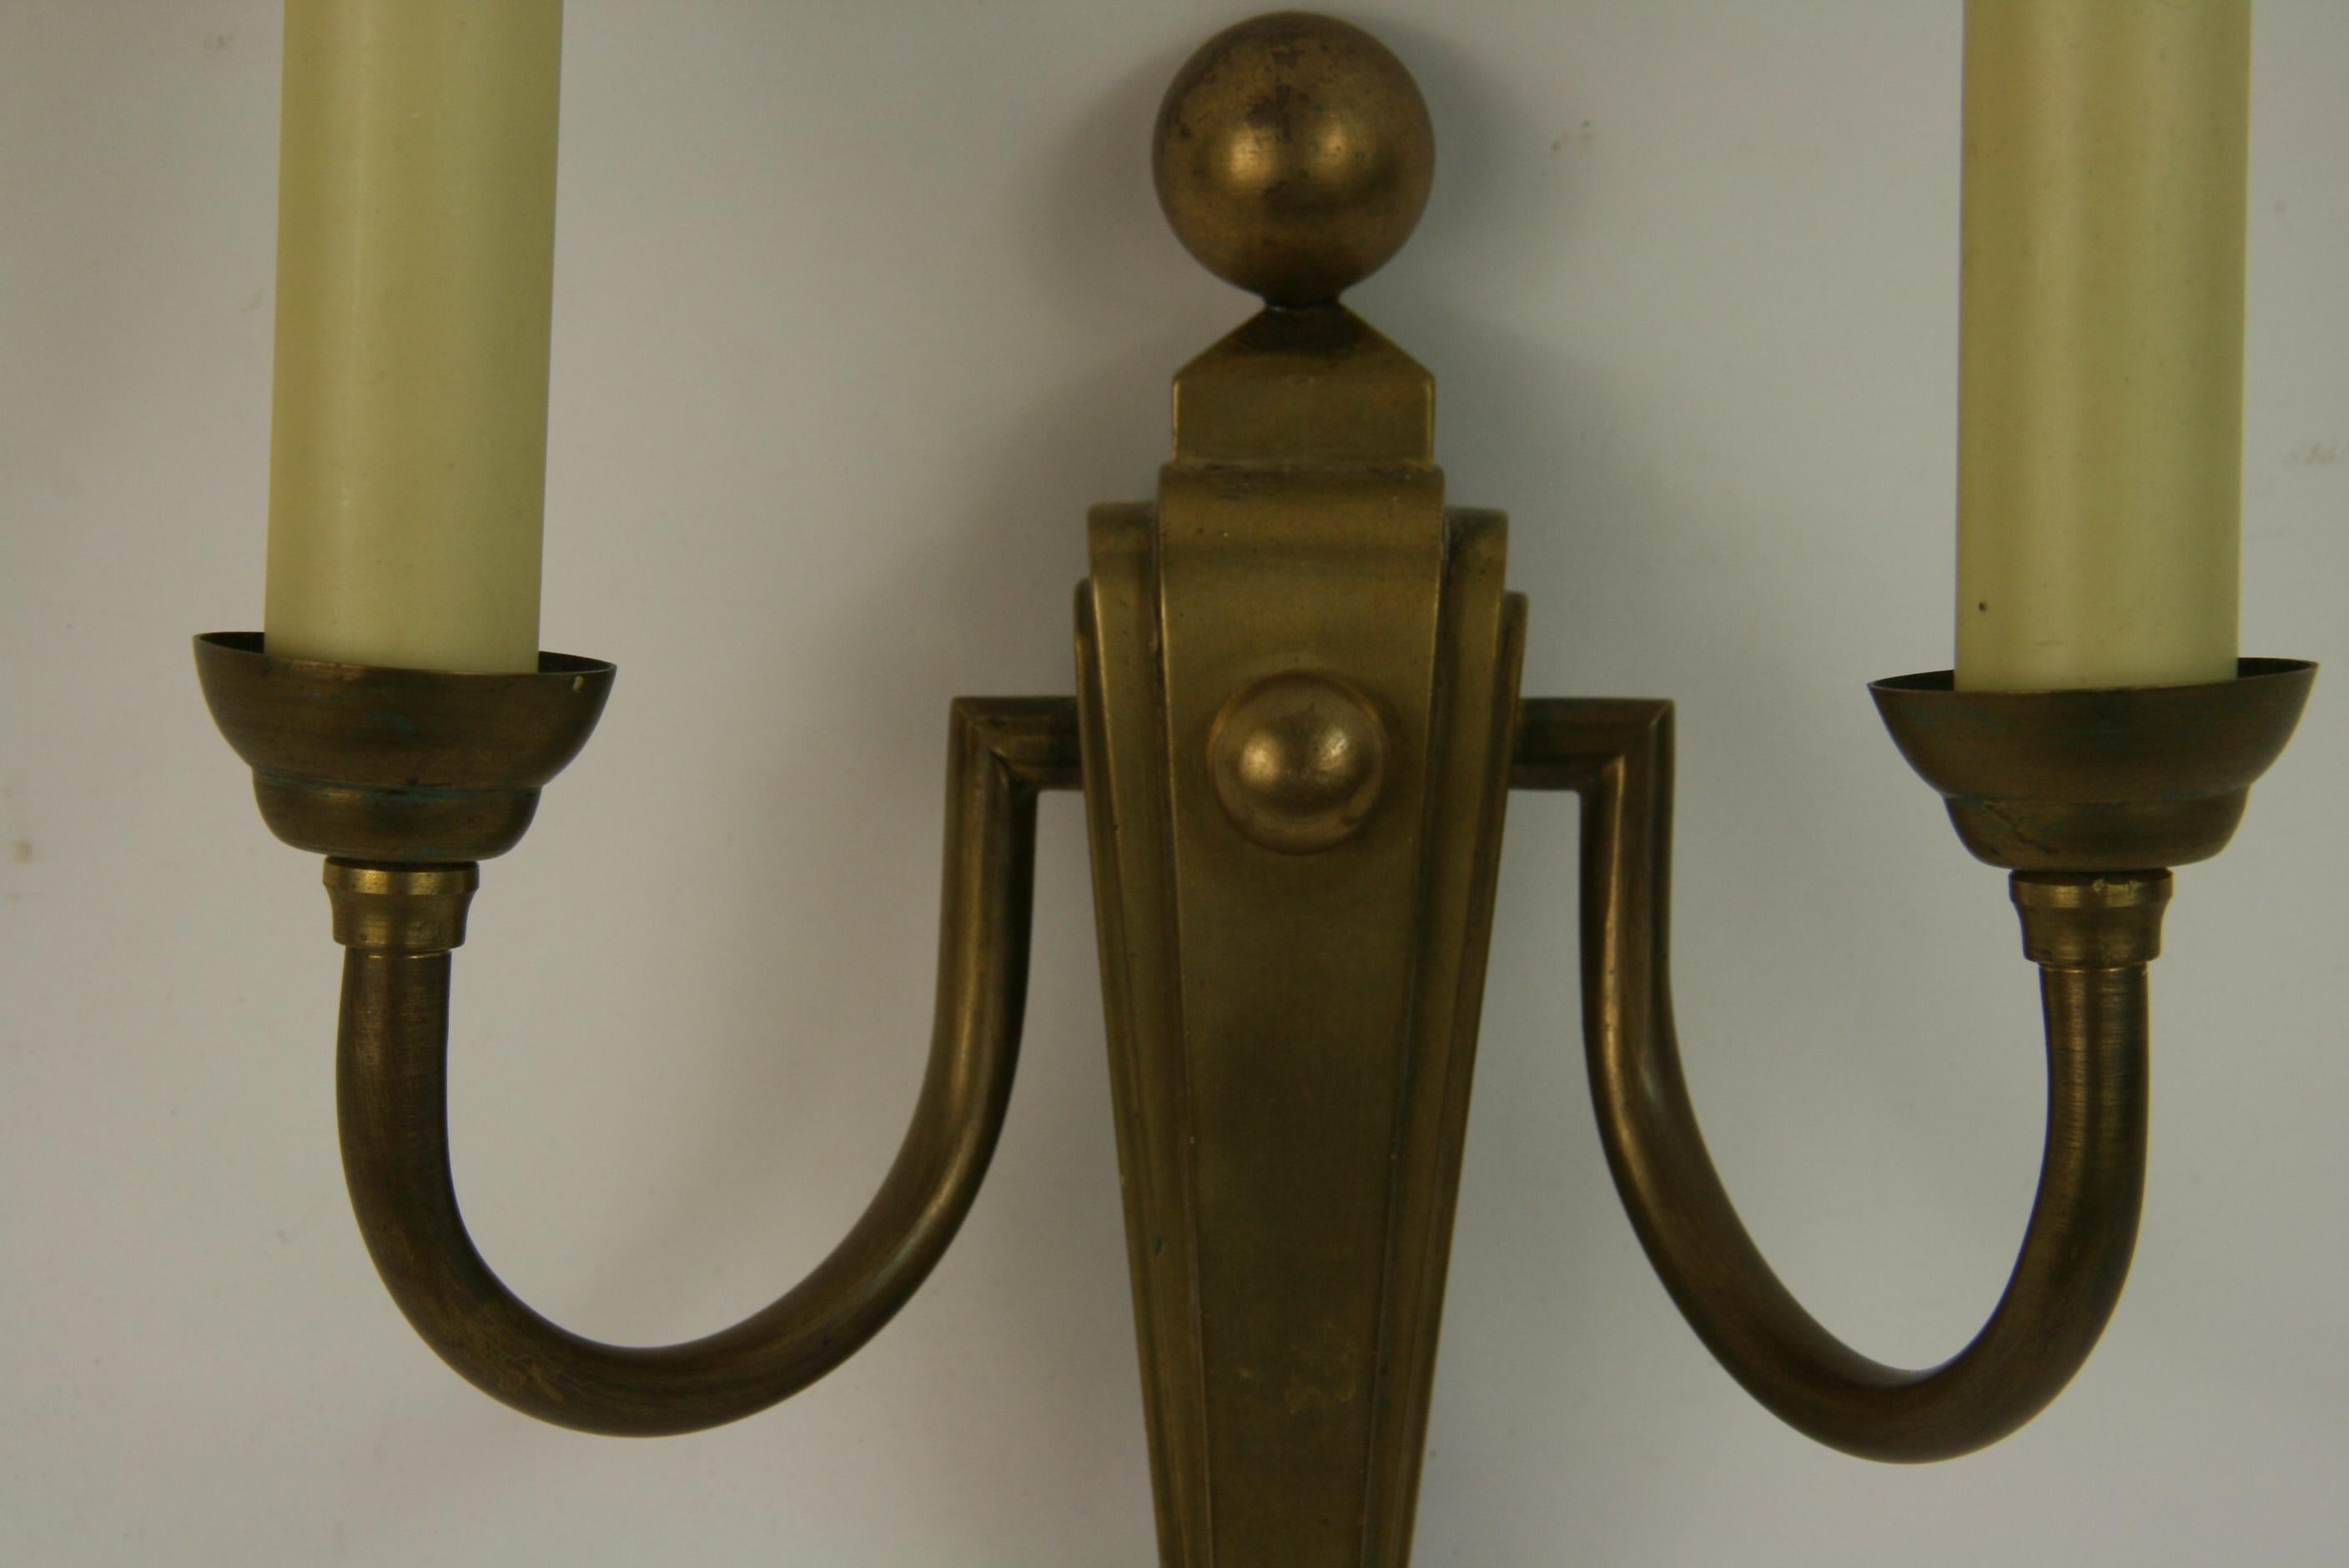 3-178 pair of French Art Deco 2 light sconces
Take 2 candelabra based bulbs rewired for US.